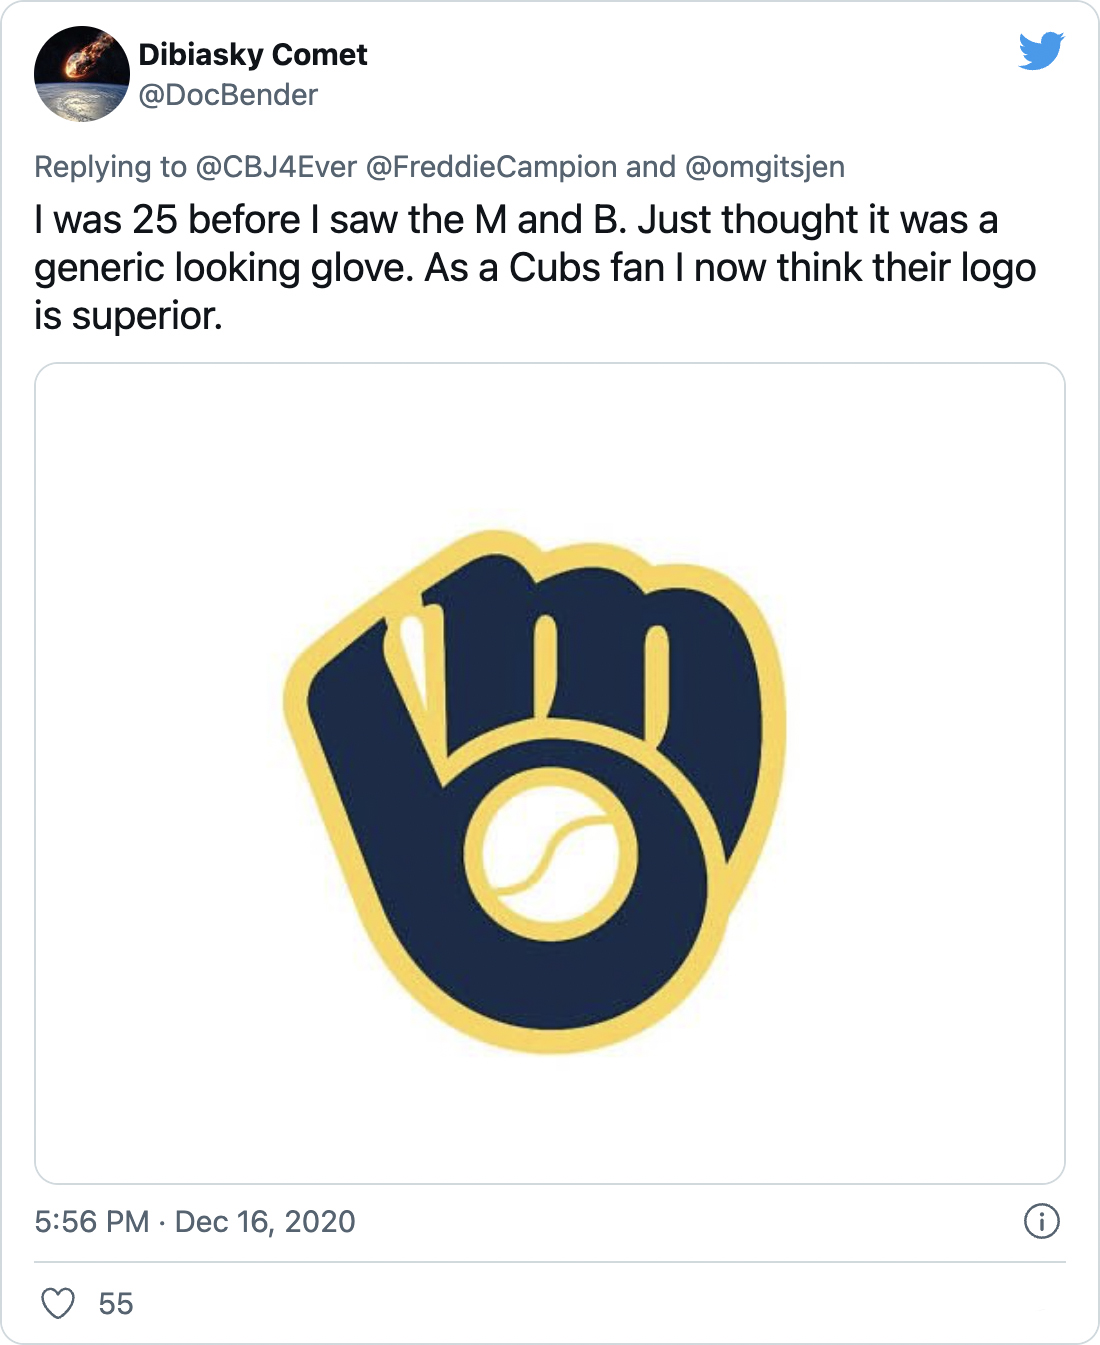 I was 25 before I saw the M and B. Just thought it was a generic looking glove. As a Cubs fan I now think their logo is superior. - @DocBender